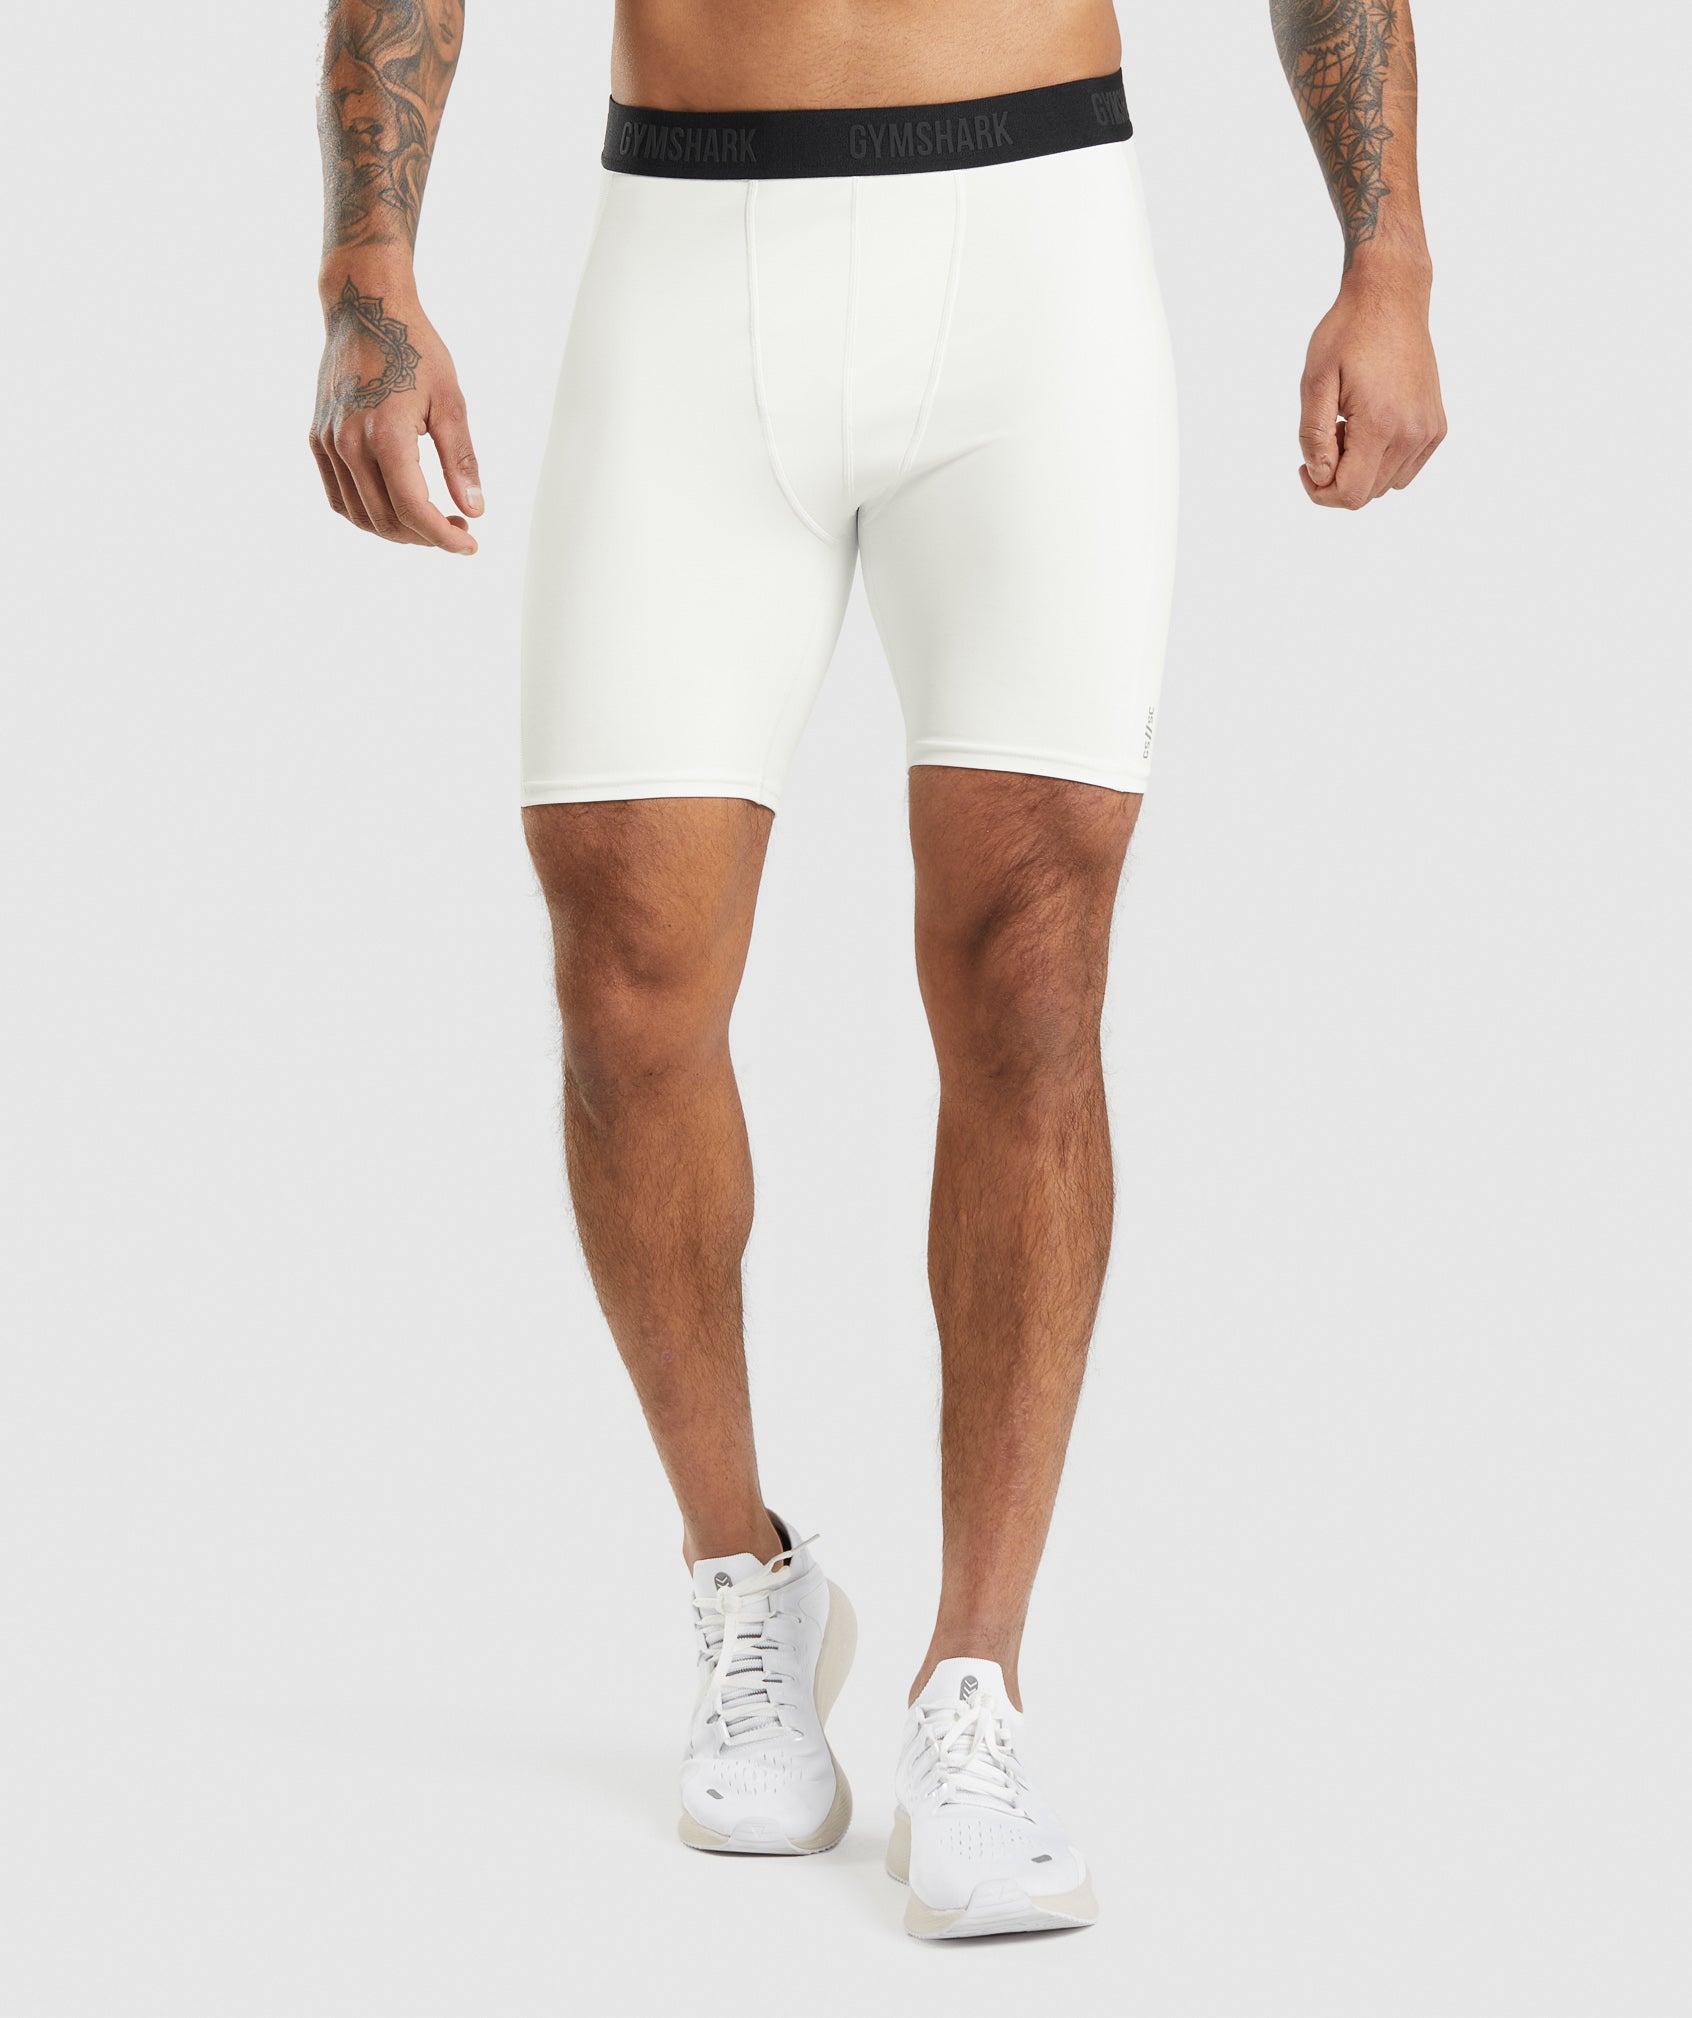 Gymshark//Steve Cook Baselayer Shorts in Off White - view 1